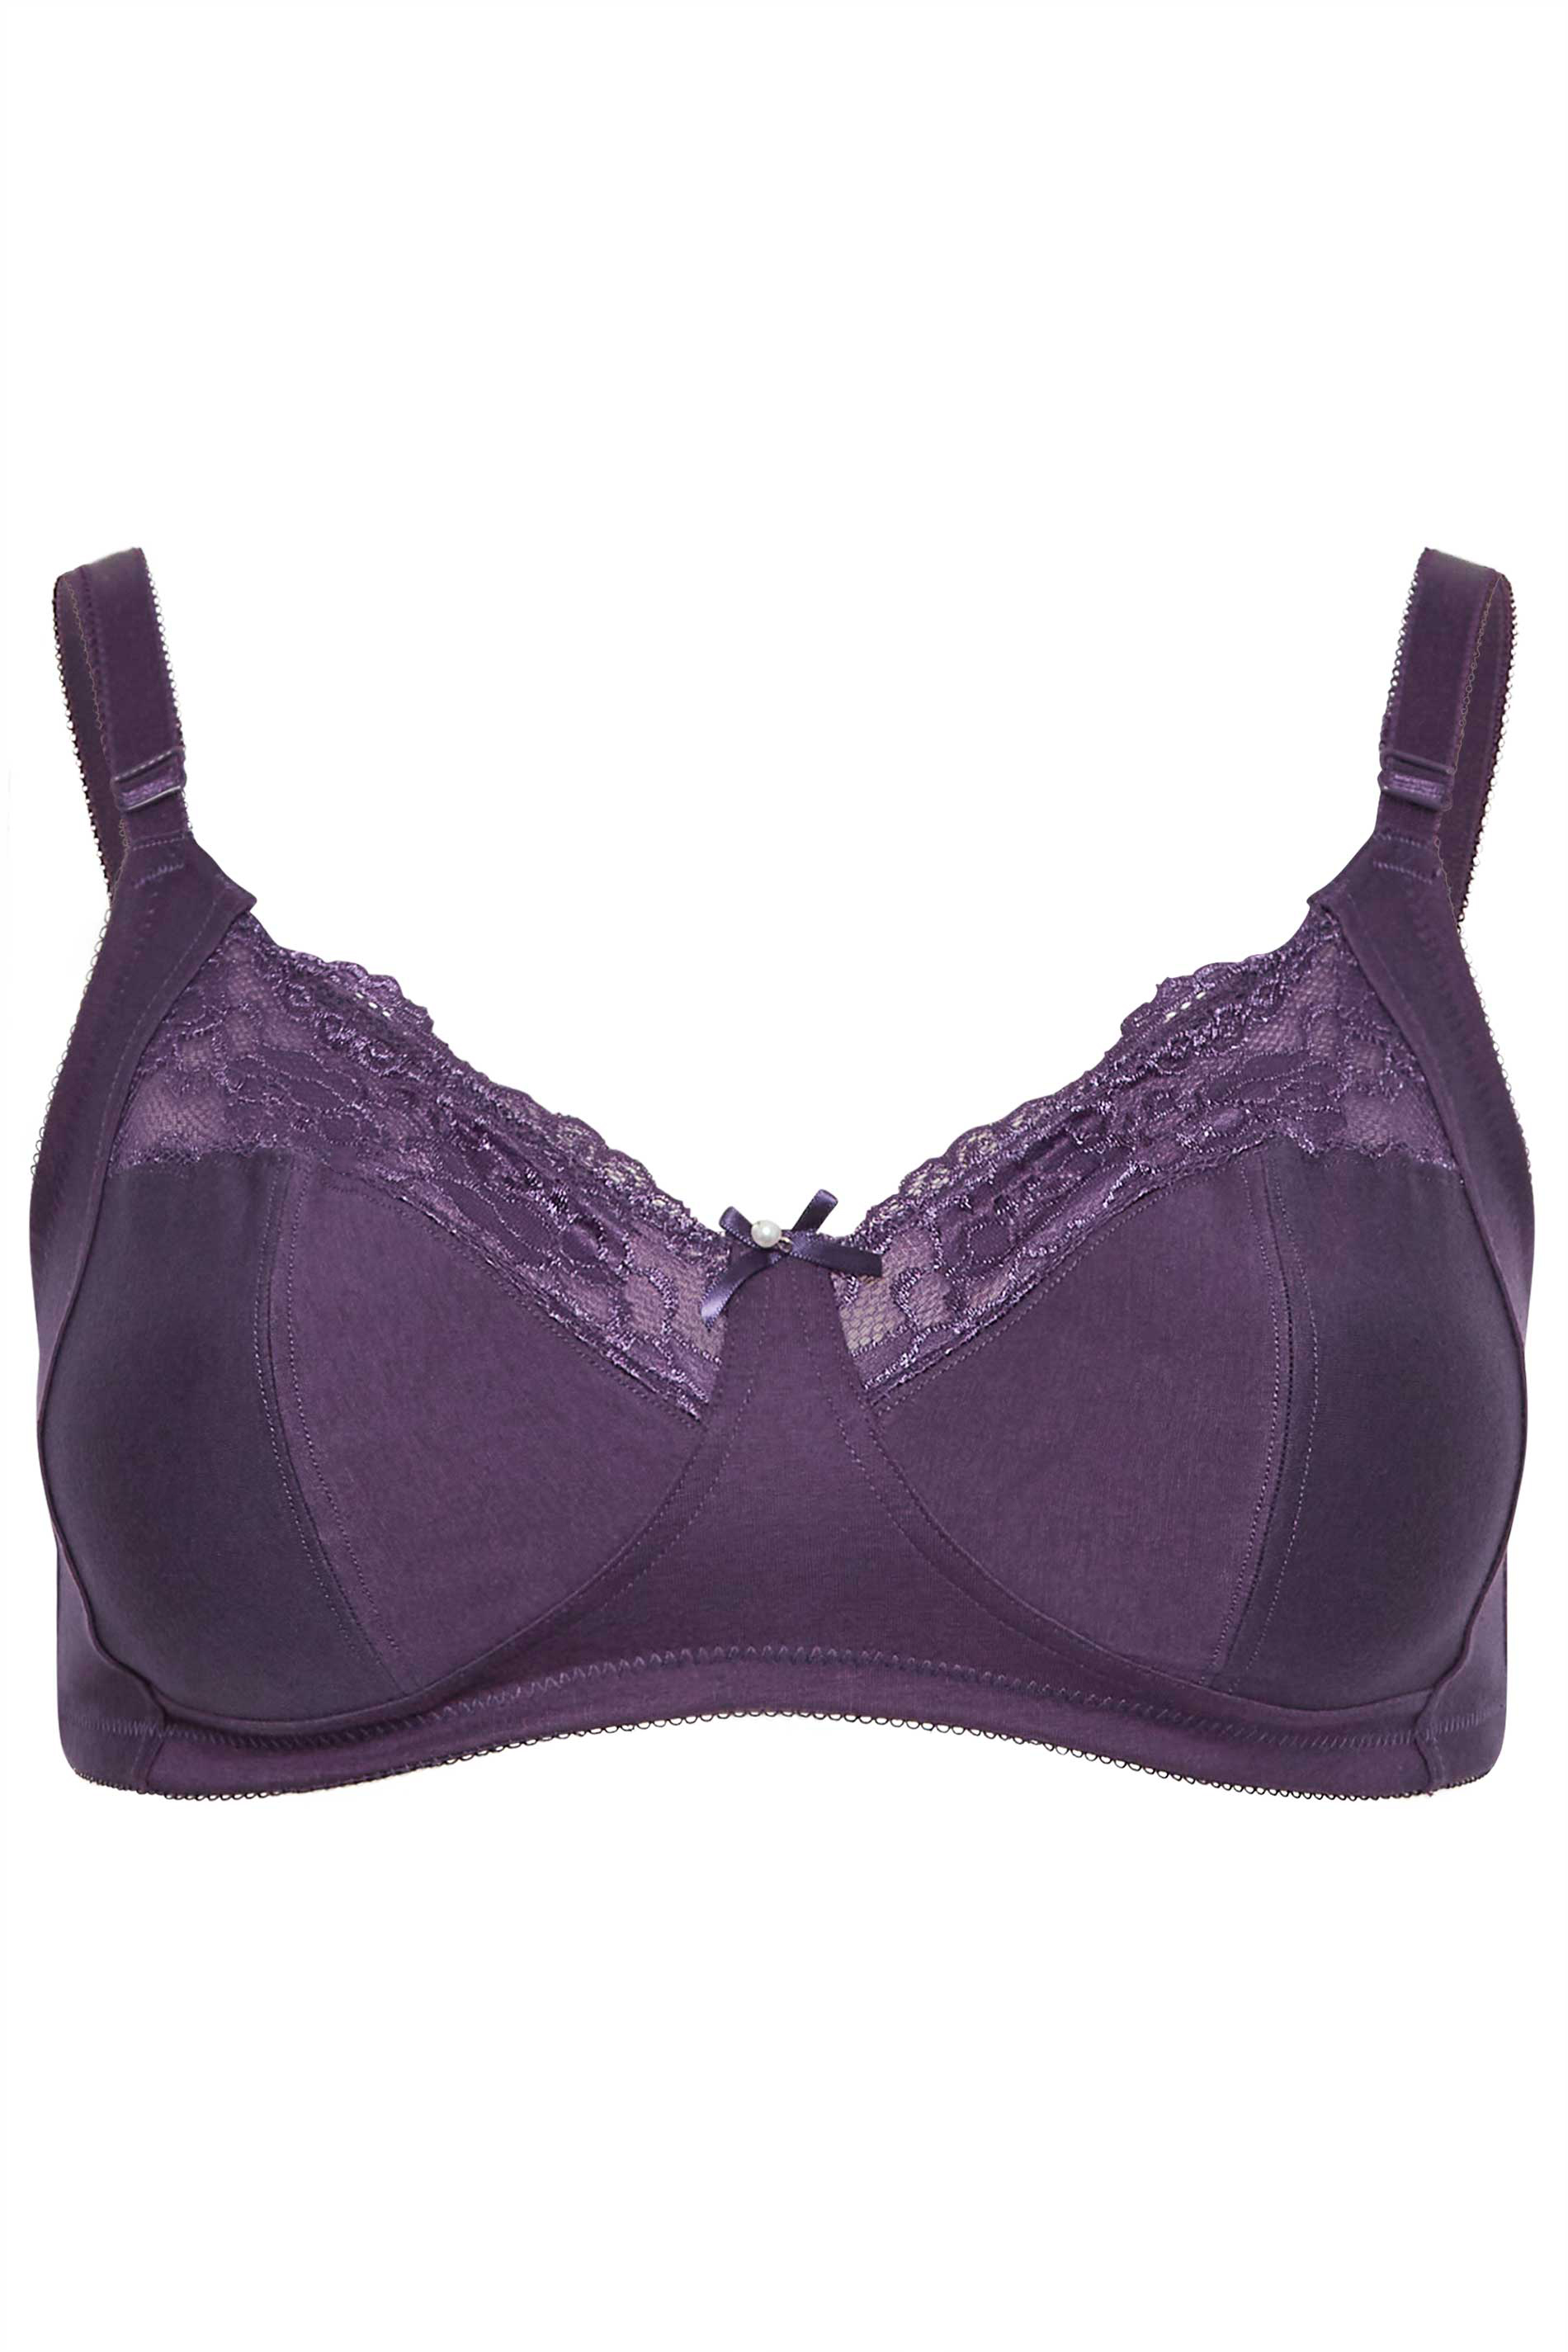 Lace Trim Non-Wired Non-Padded Bras 2 Pack, Lingerie